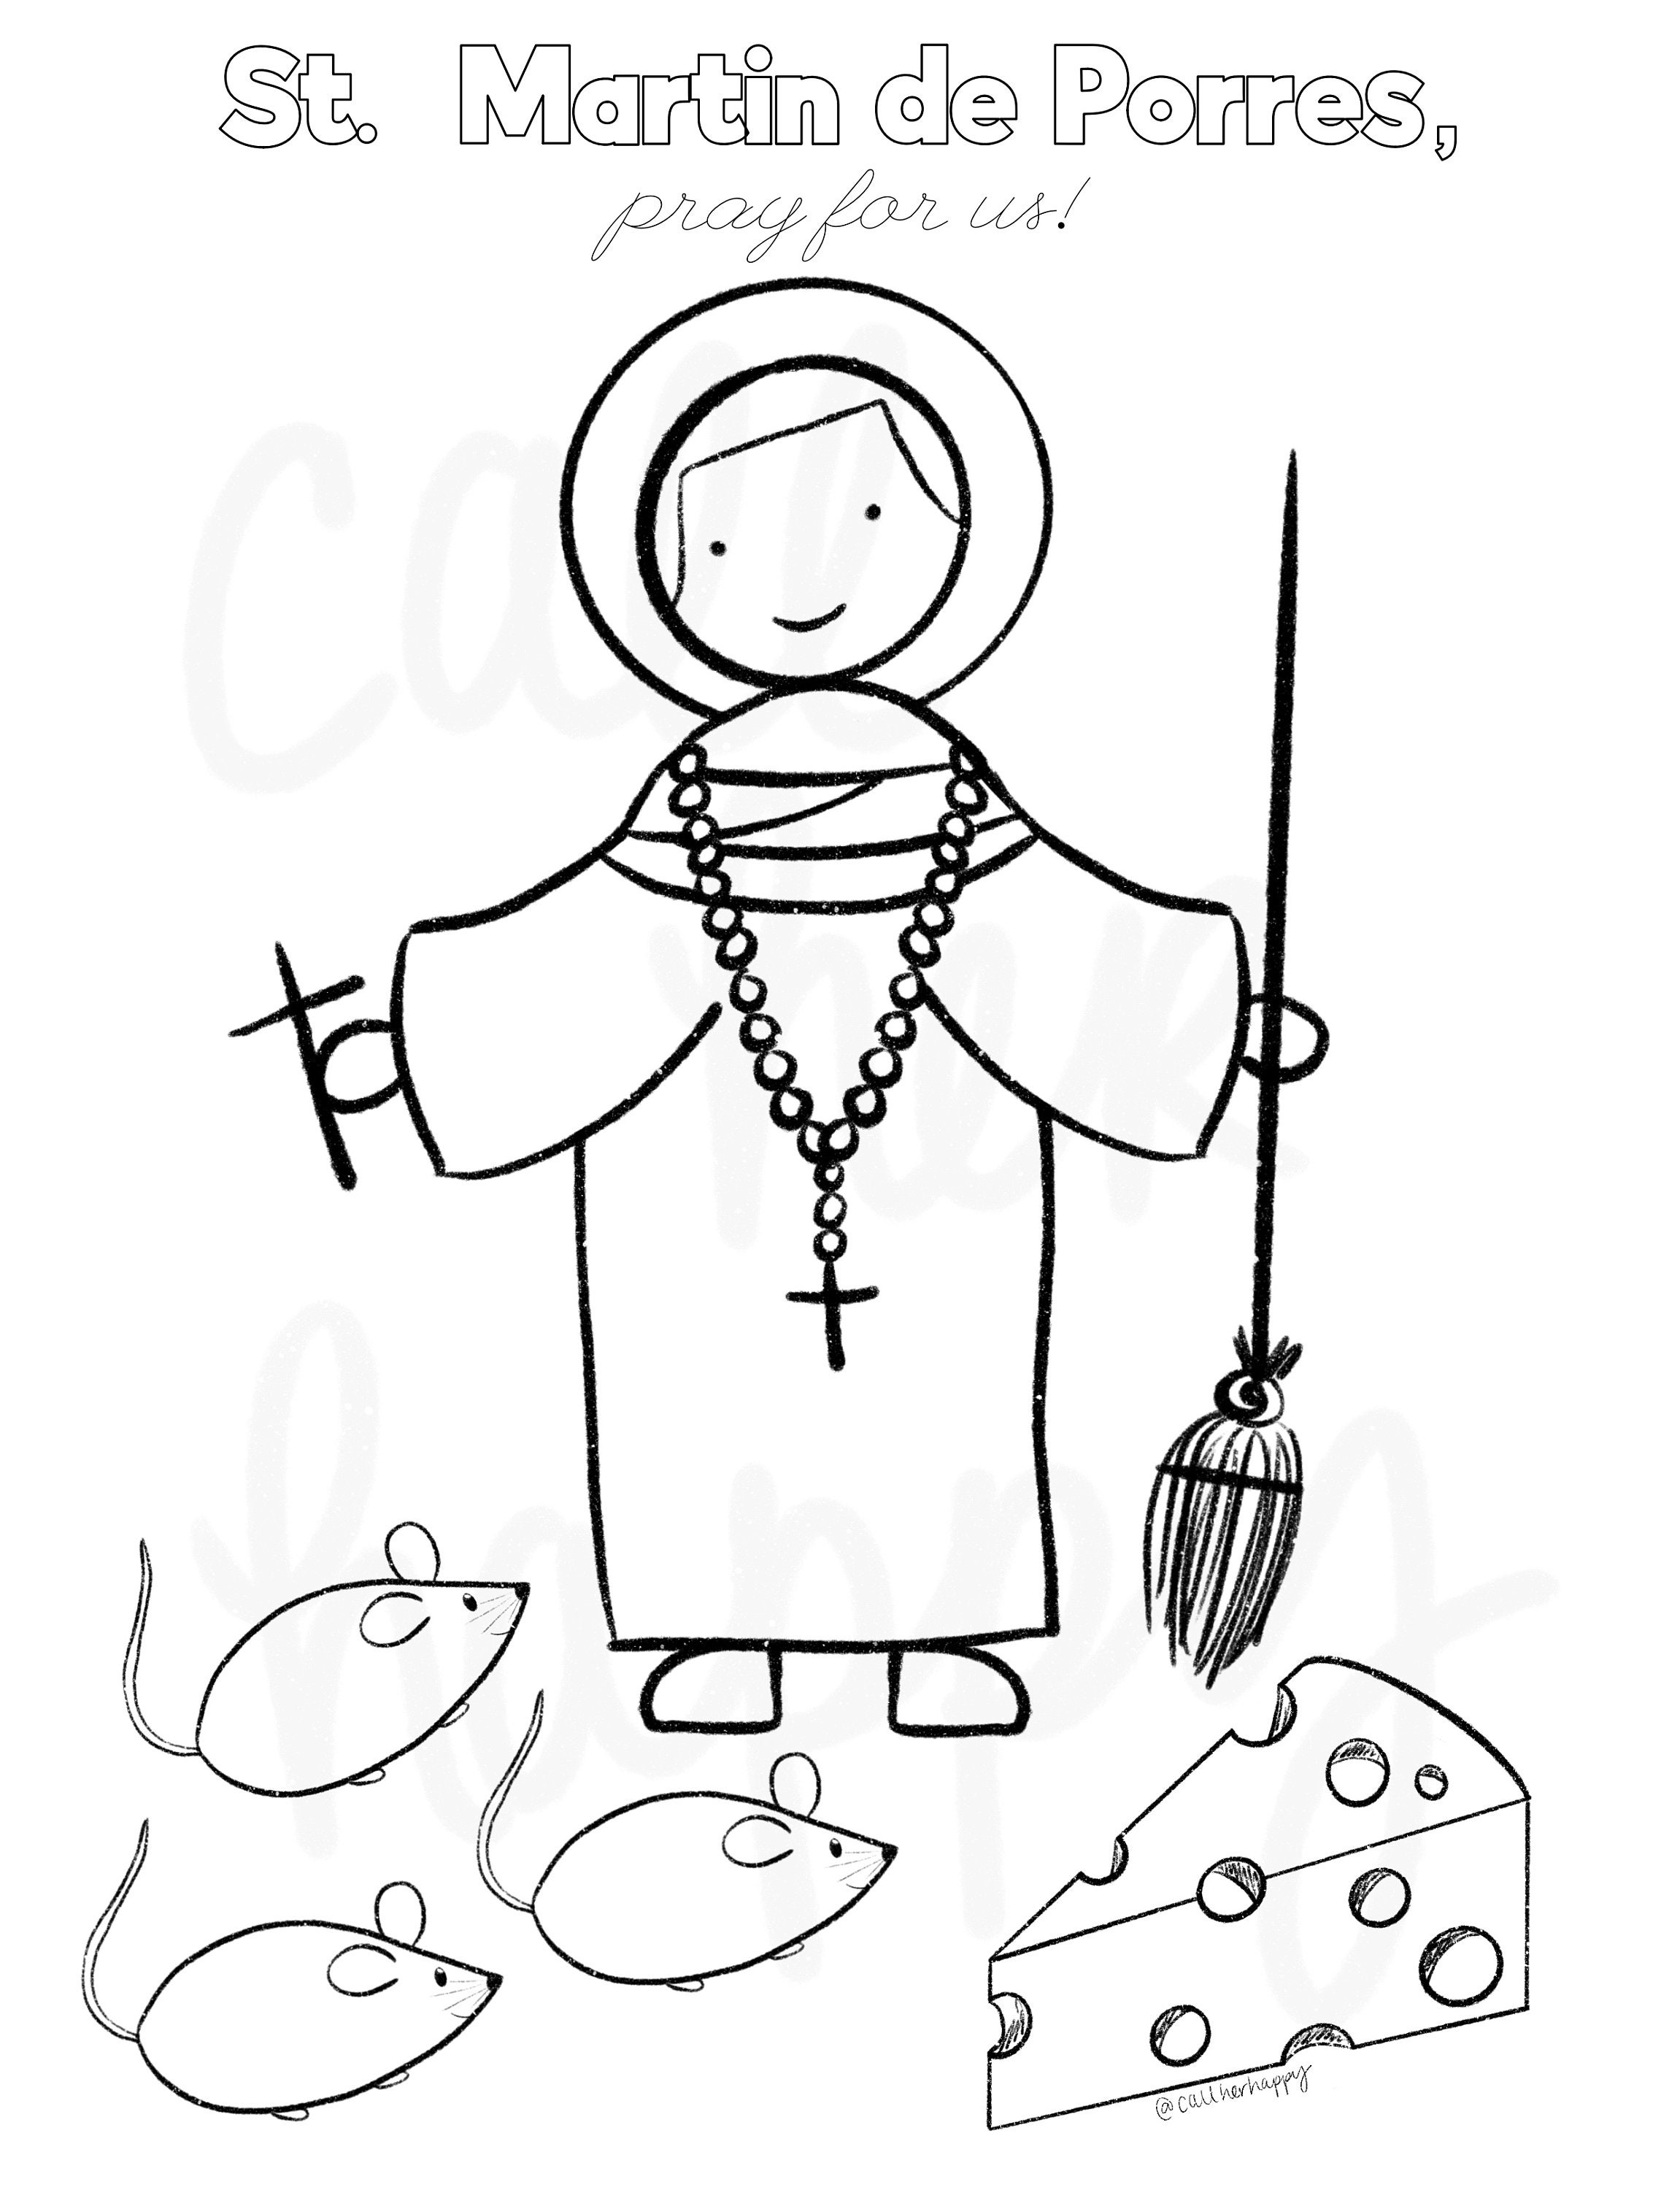 St martin de porres coloring page sheet liturgical year catholic resources for kids lazy liturgical feast day holiday prayer activity download now